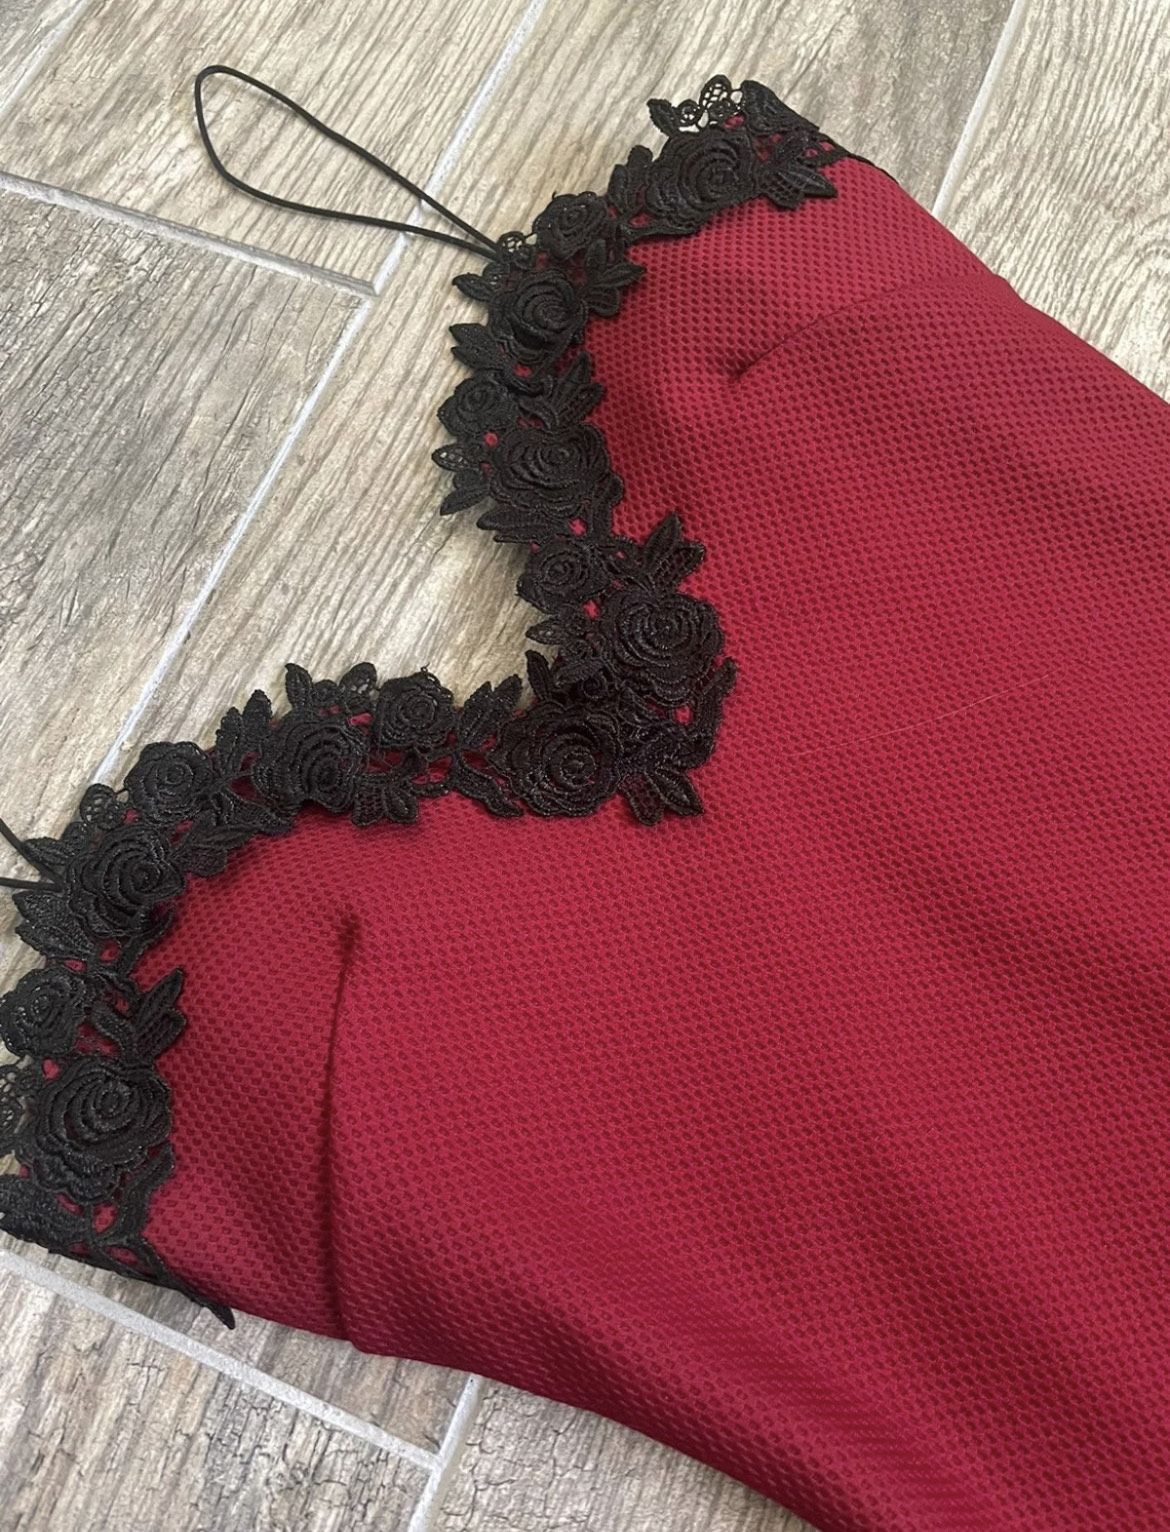 Windsor Size 2 Lace Red Cocktail Dress on Queenly